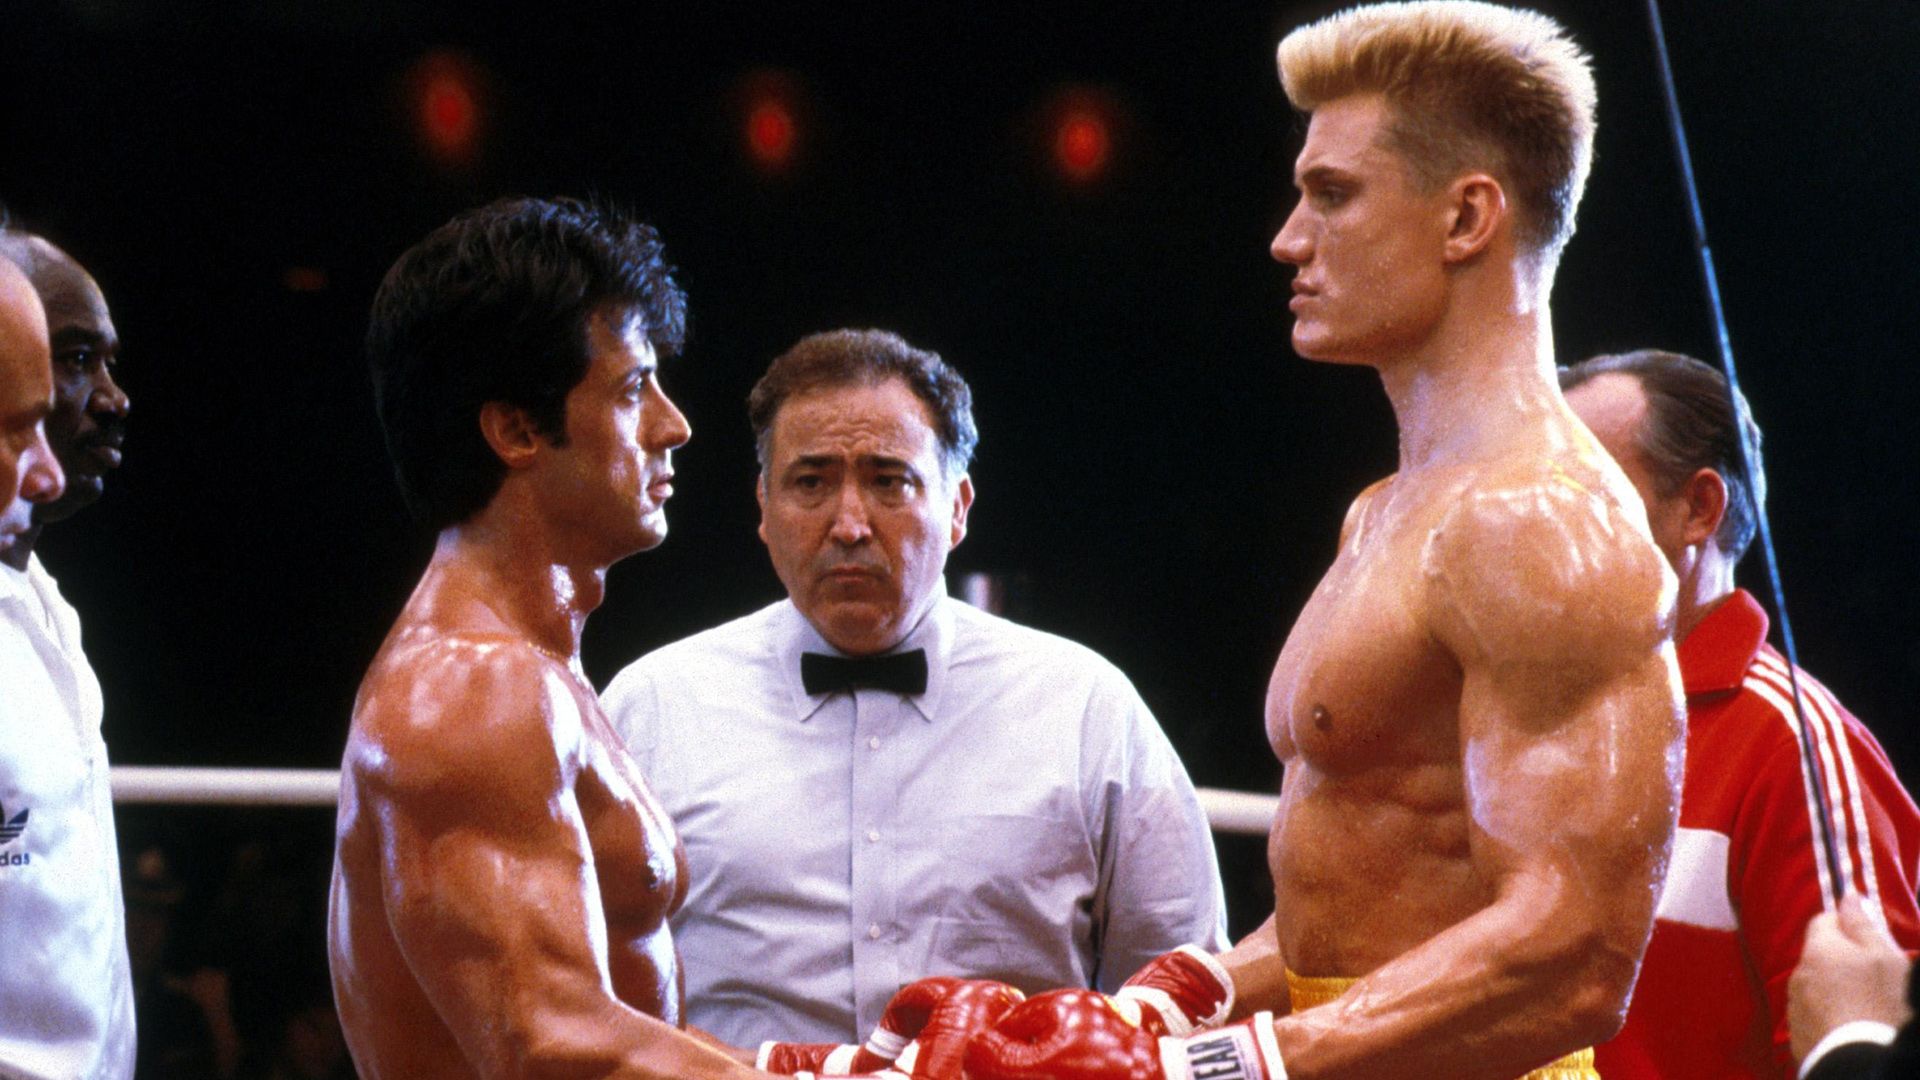 Dolph Lundgren is biting my funk…A love story